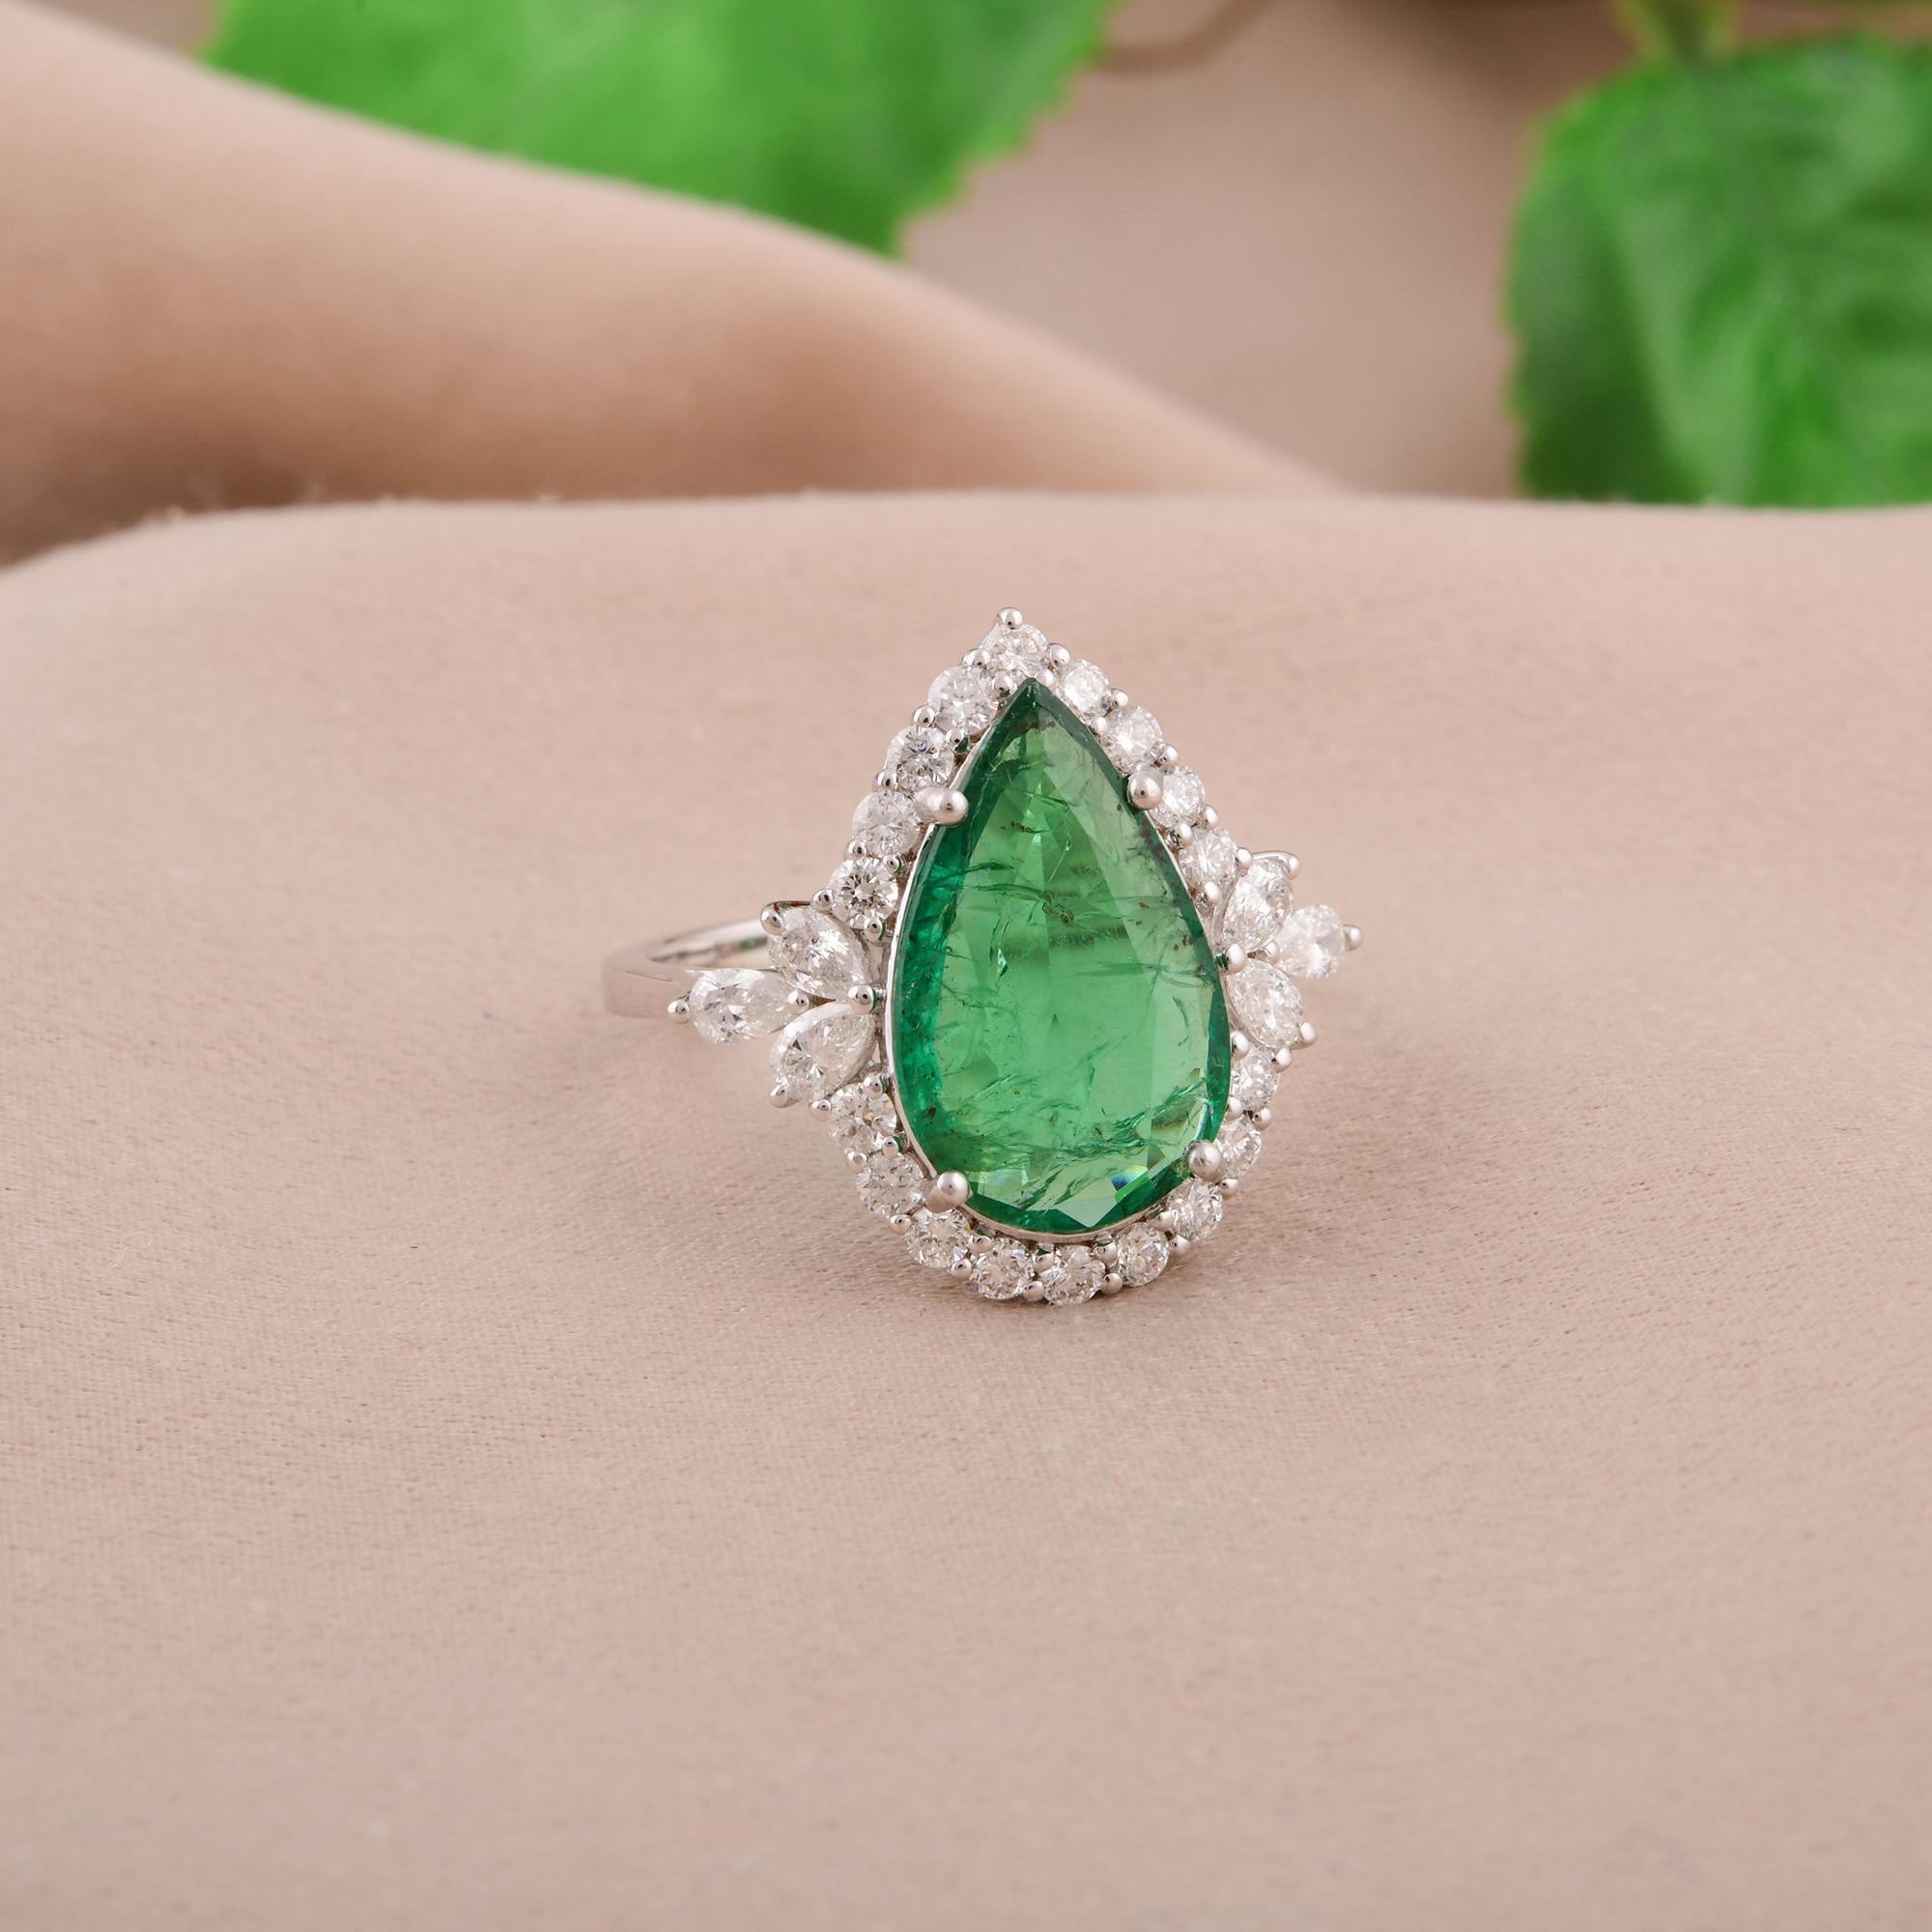 Pear Cut Natural Pear Emerald Gemstone Cocktail Ring Diamond Pave 14 Karat White Gold For Sale